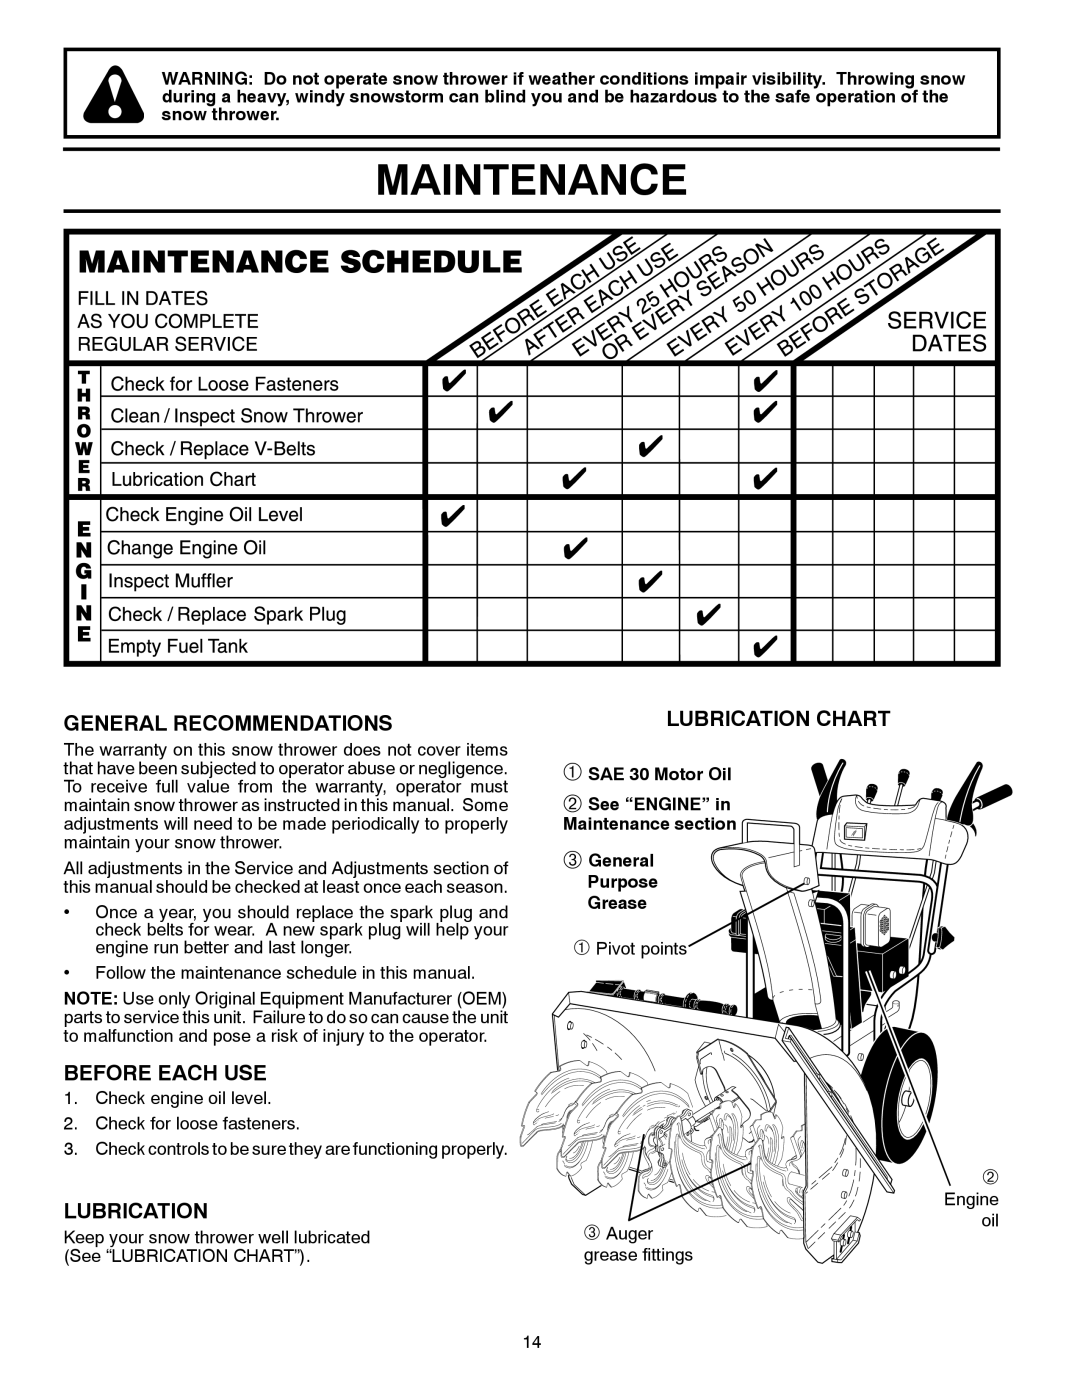 Husqvarna 96193006901, 16530 EXL General Recommendations, Before Each Use, Lubrication Chart, Maintenance section 